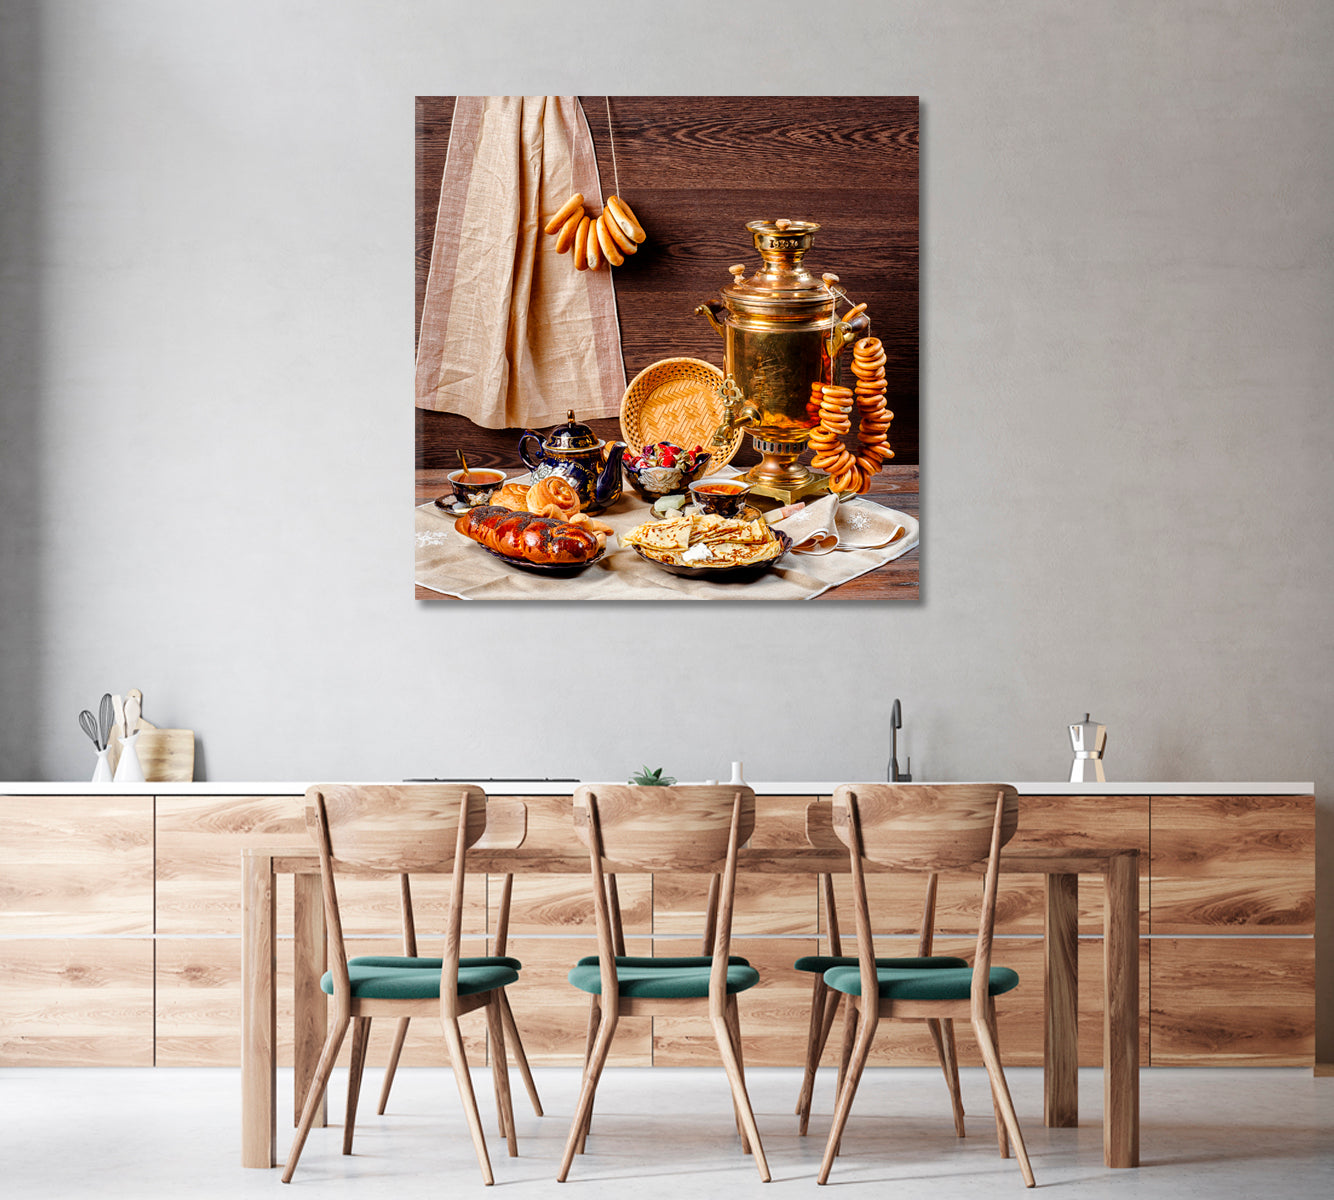 Still Life on Table Samovar with Bagels and Pancakes Canvas Print-Canvas Print-CetArt-1 panel-12x12 inches-CetArt